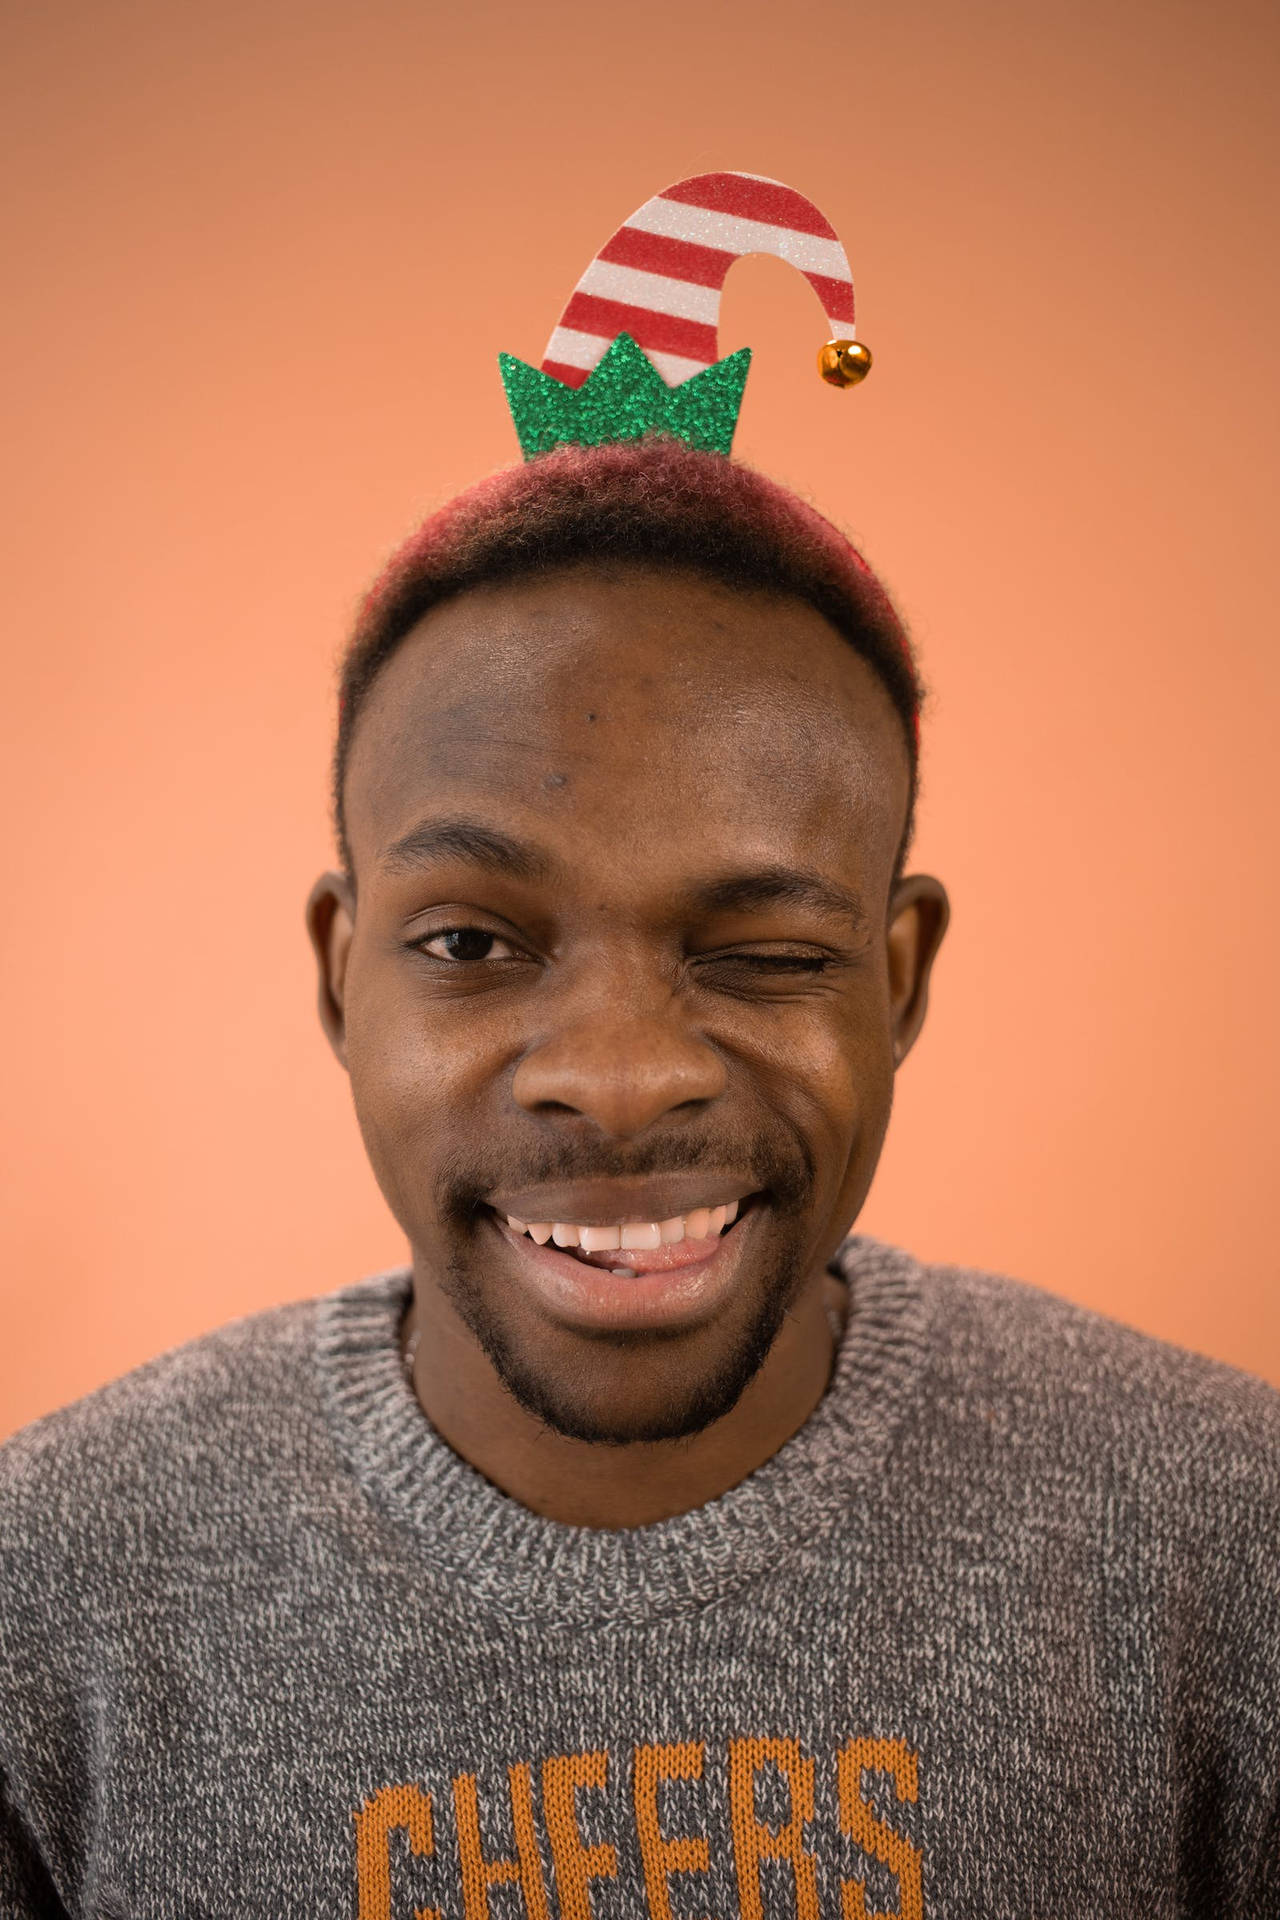 Man Wearing Elf Hat Funny Christmas Background